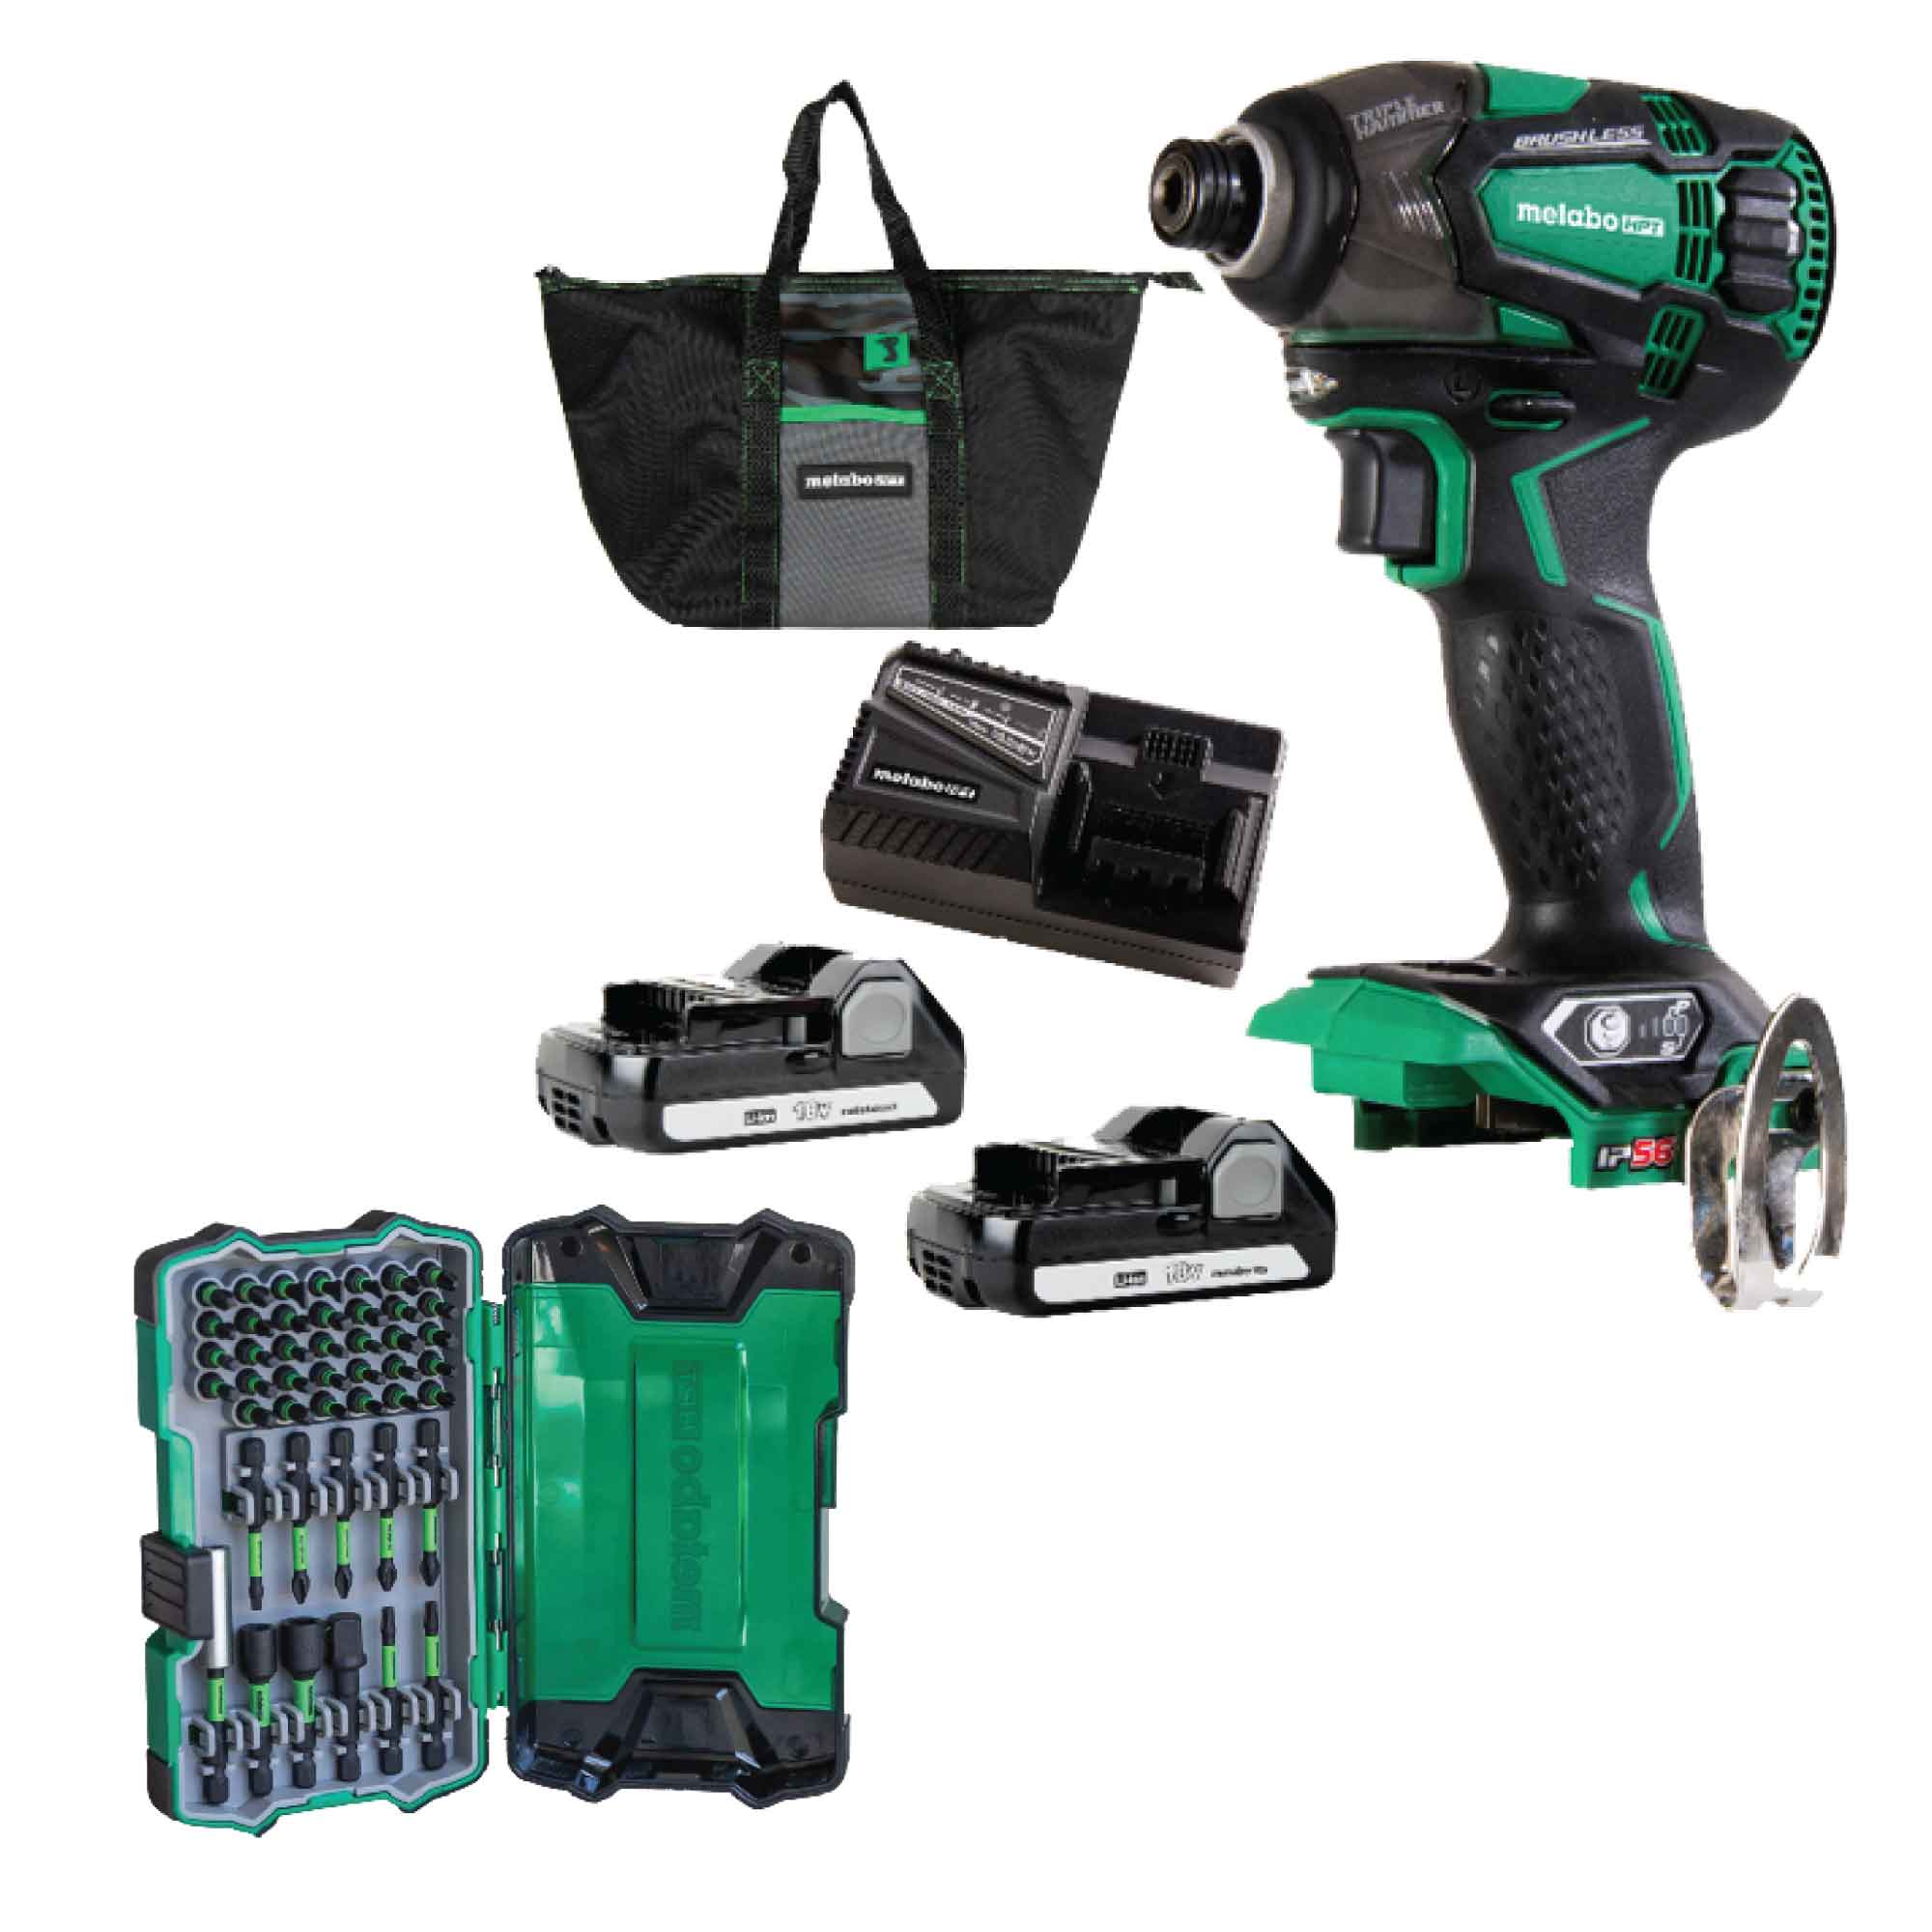 Metabo HPT MultiVolt 18-volt 1/4-in Variable Speed Brushless Cordless Impact Driver with 45-Piece 1/4-in x Set Impact Driver Bit Set